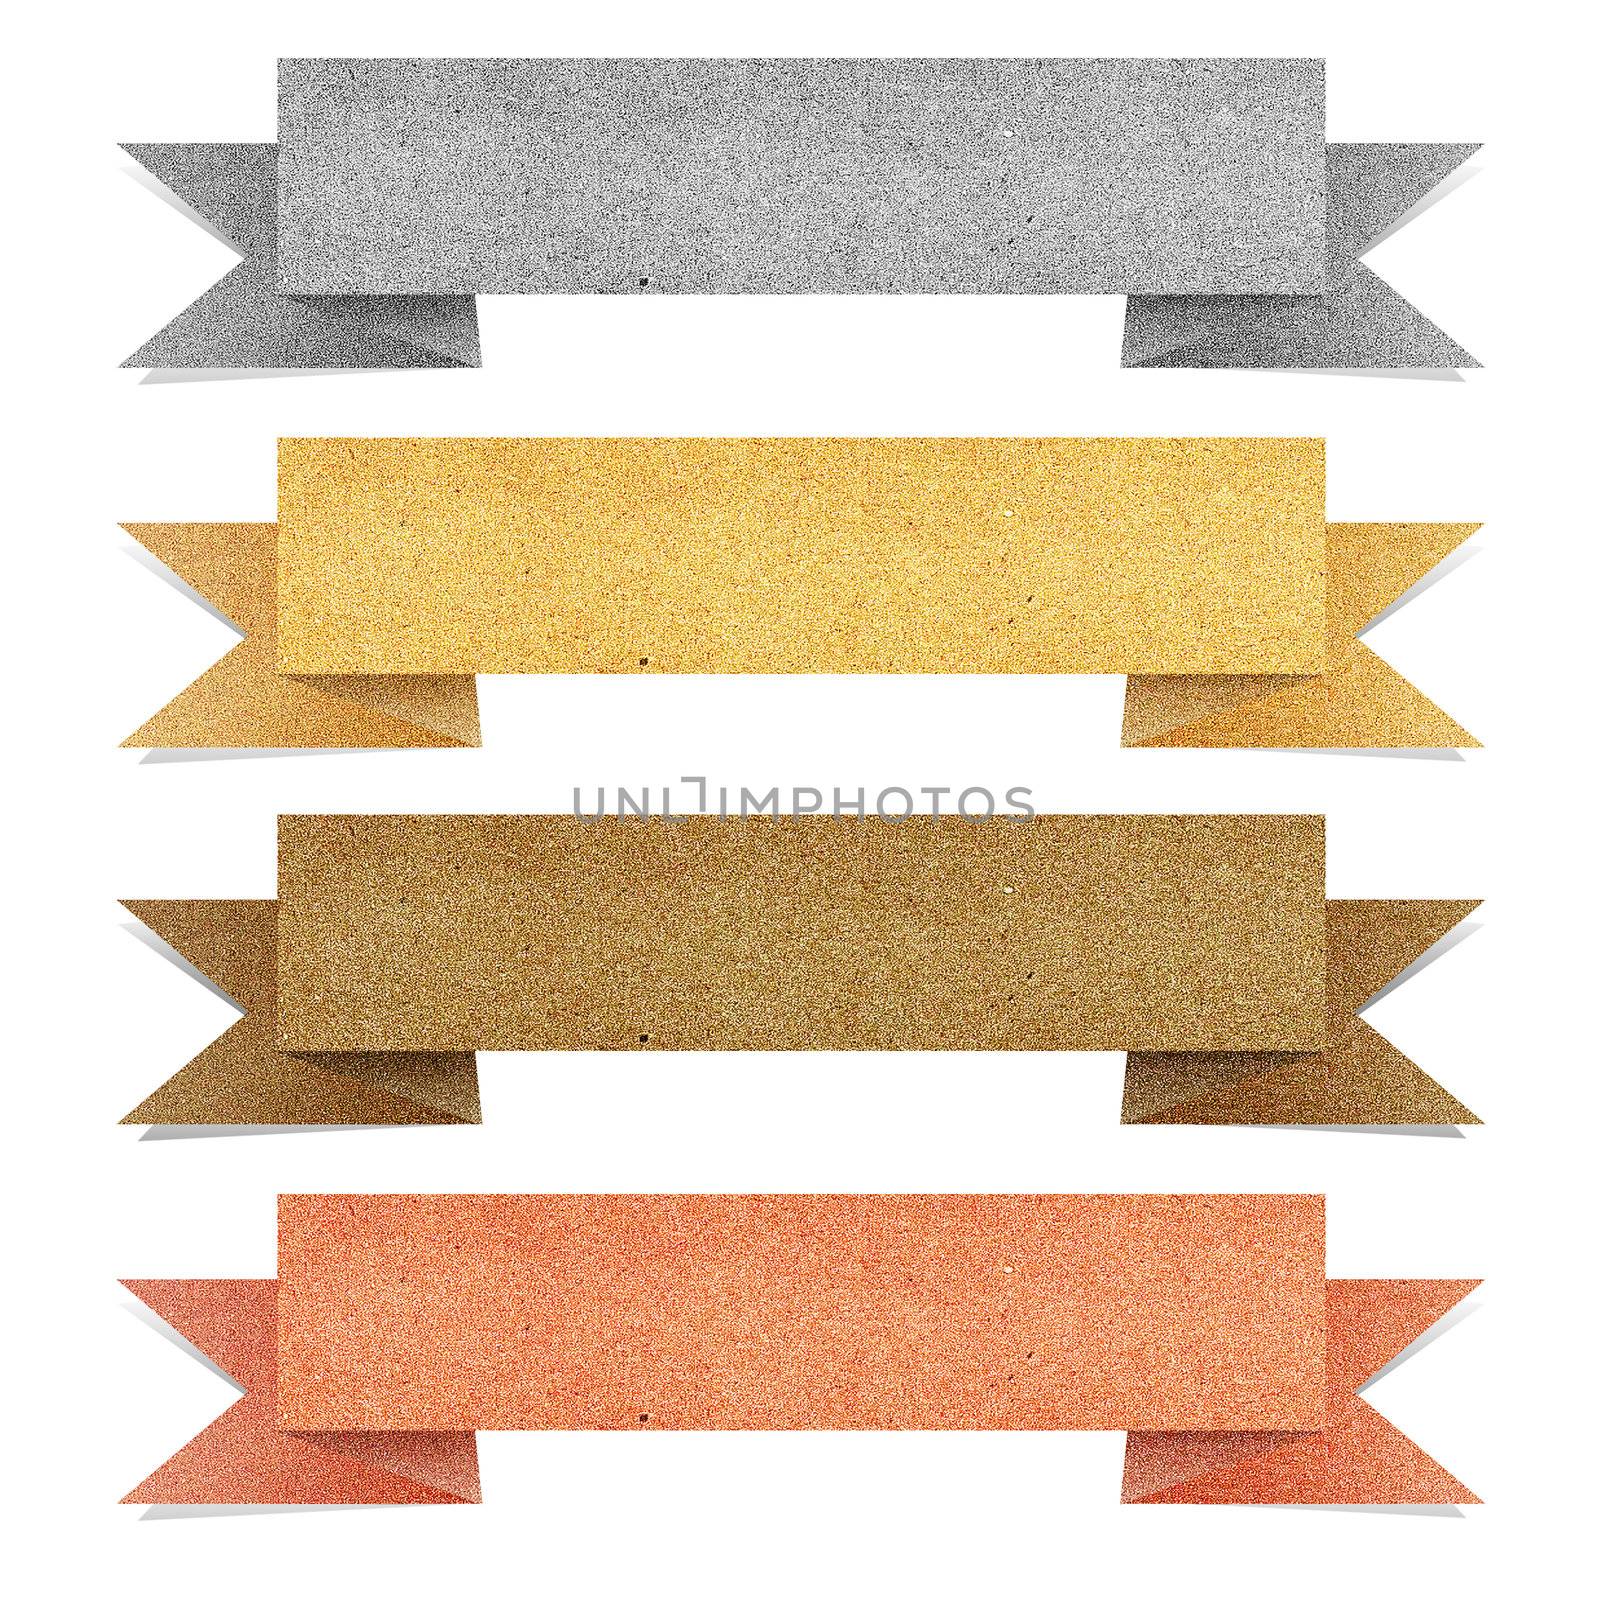 Paper texture ,Header tag recycled paper on white background by jakgree